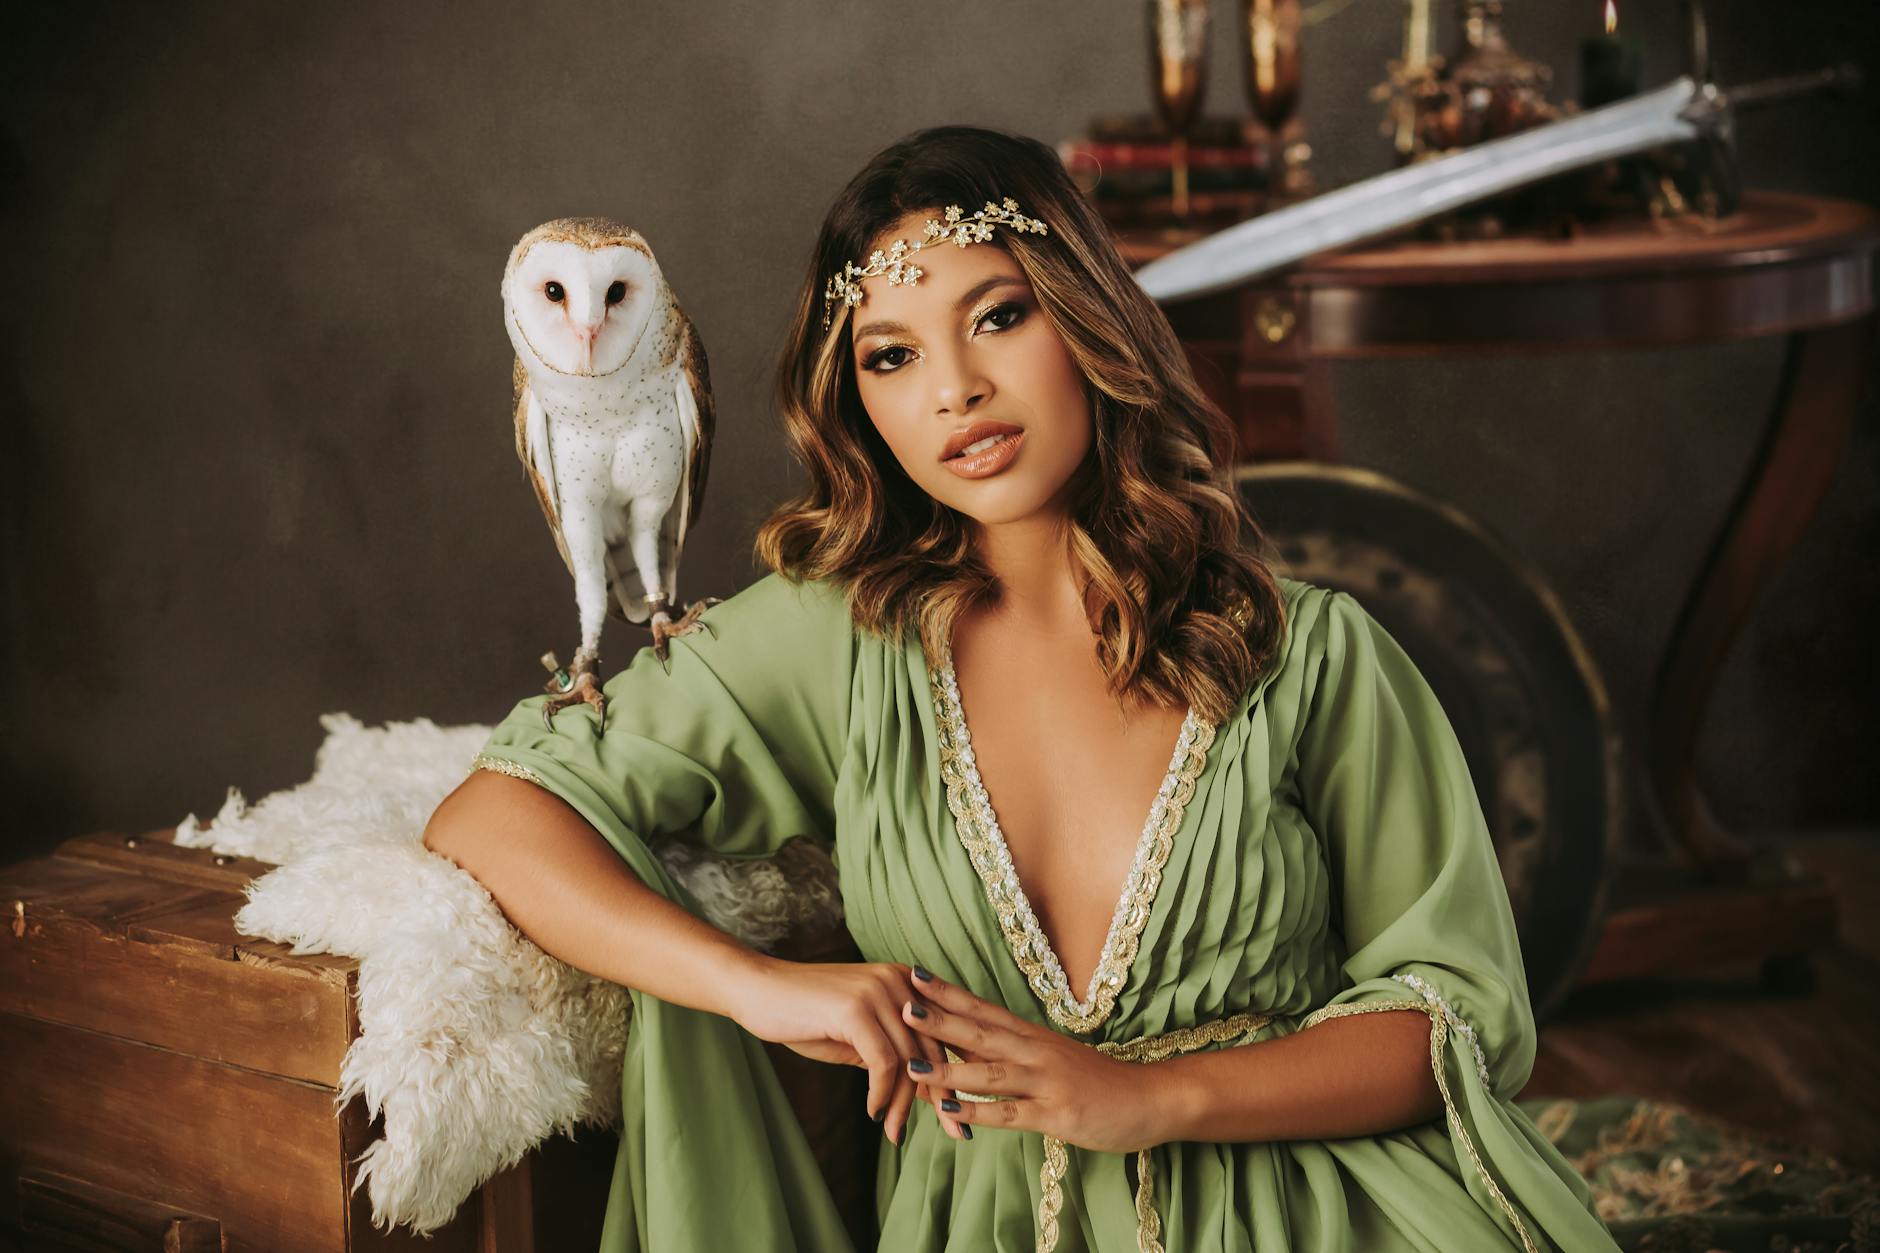 Portrait of Woman in Green Clothes and with Owl Figurine